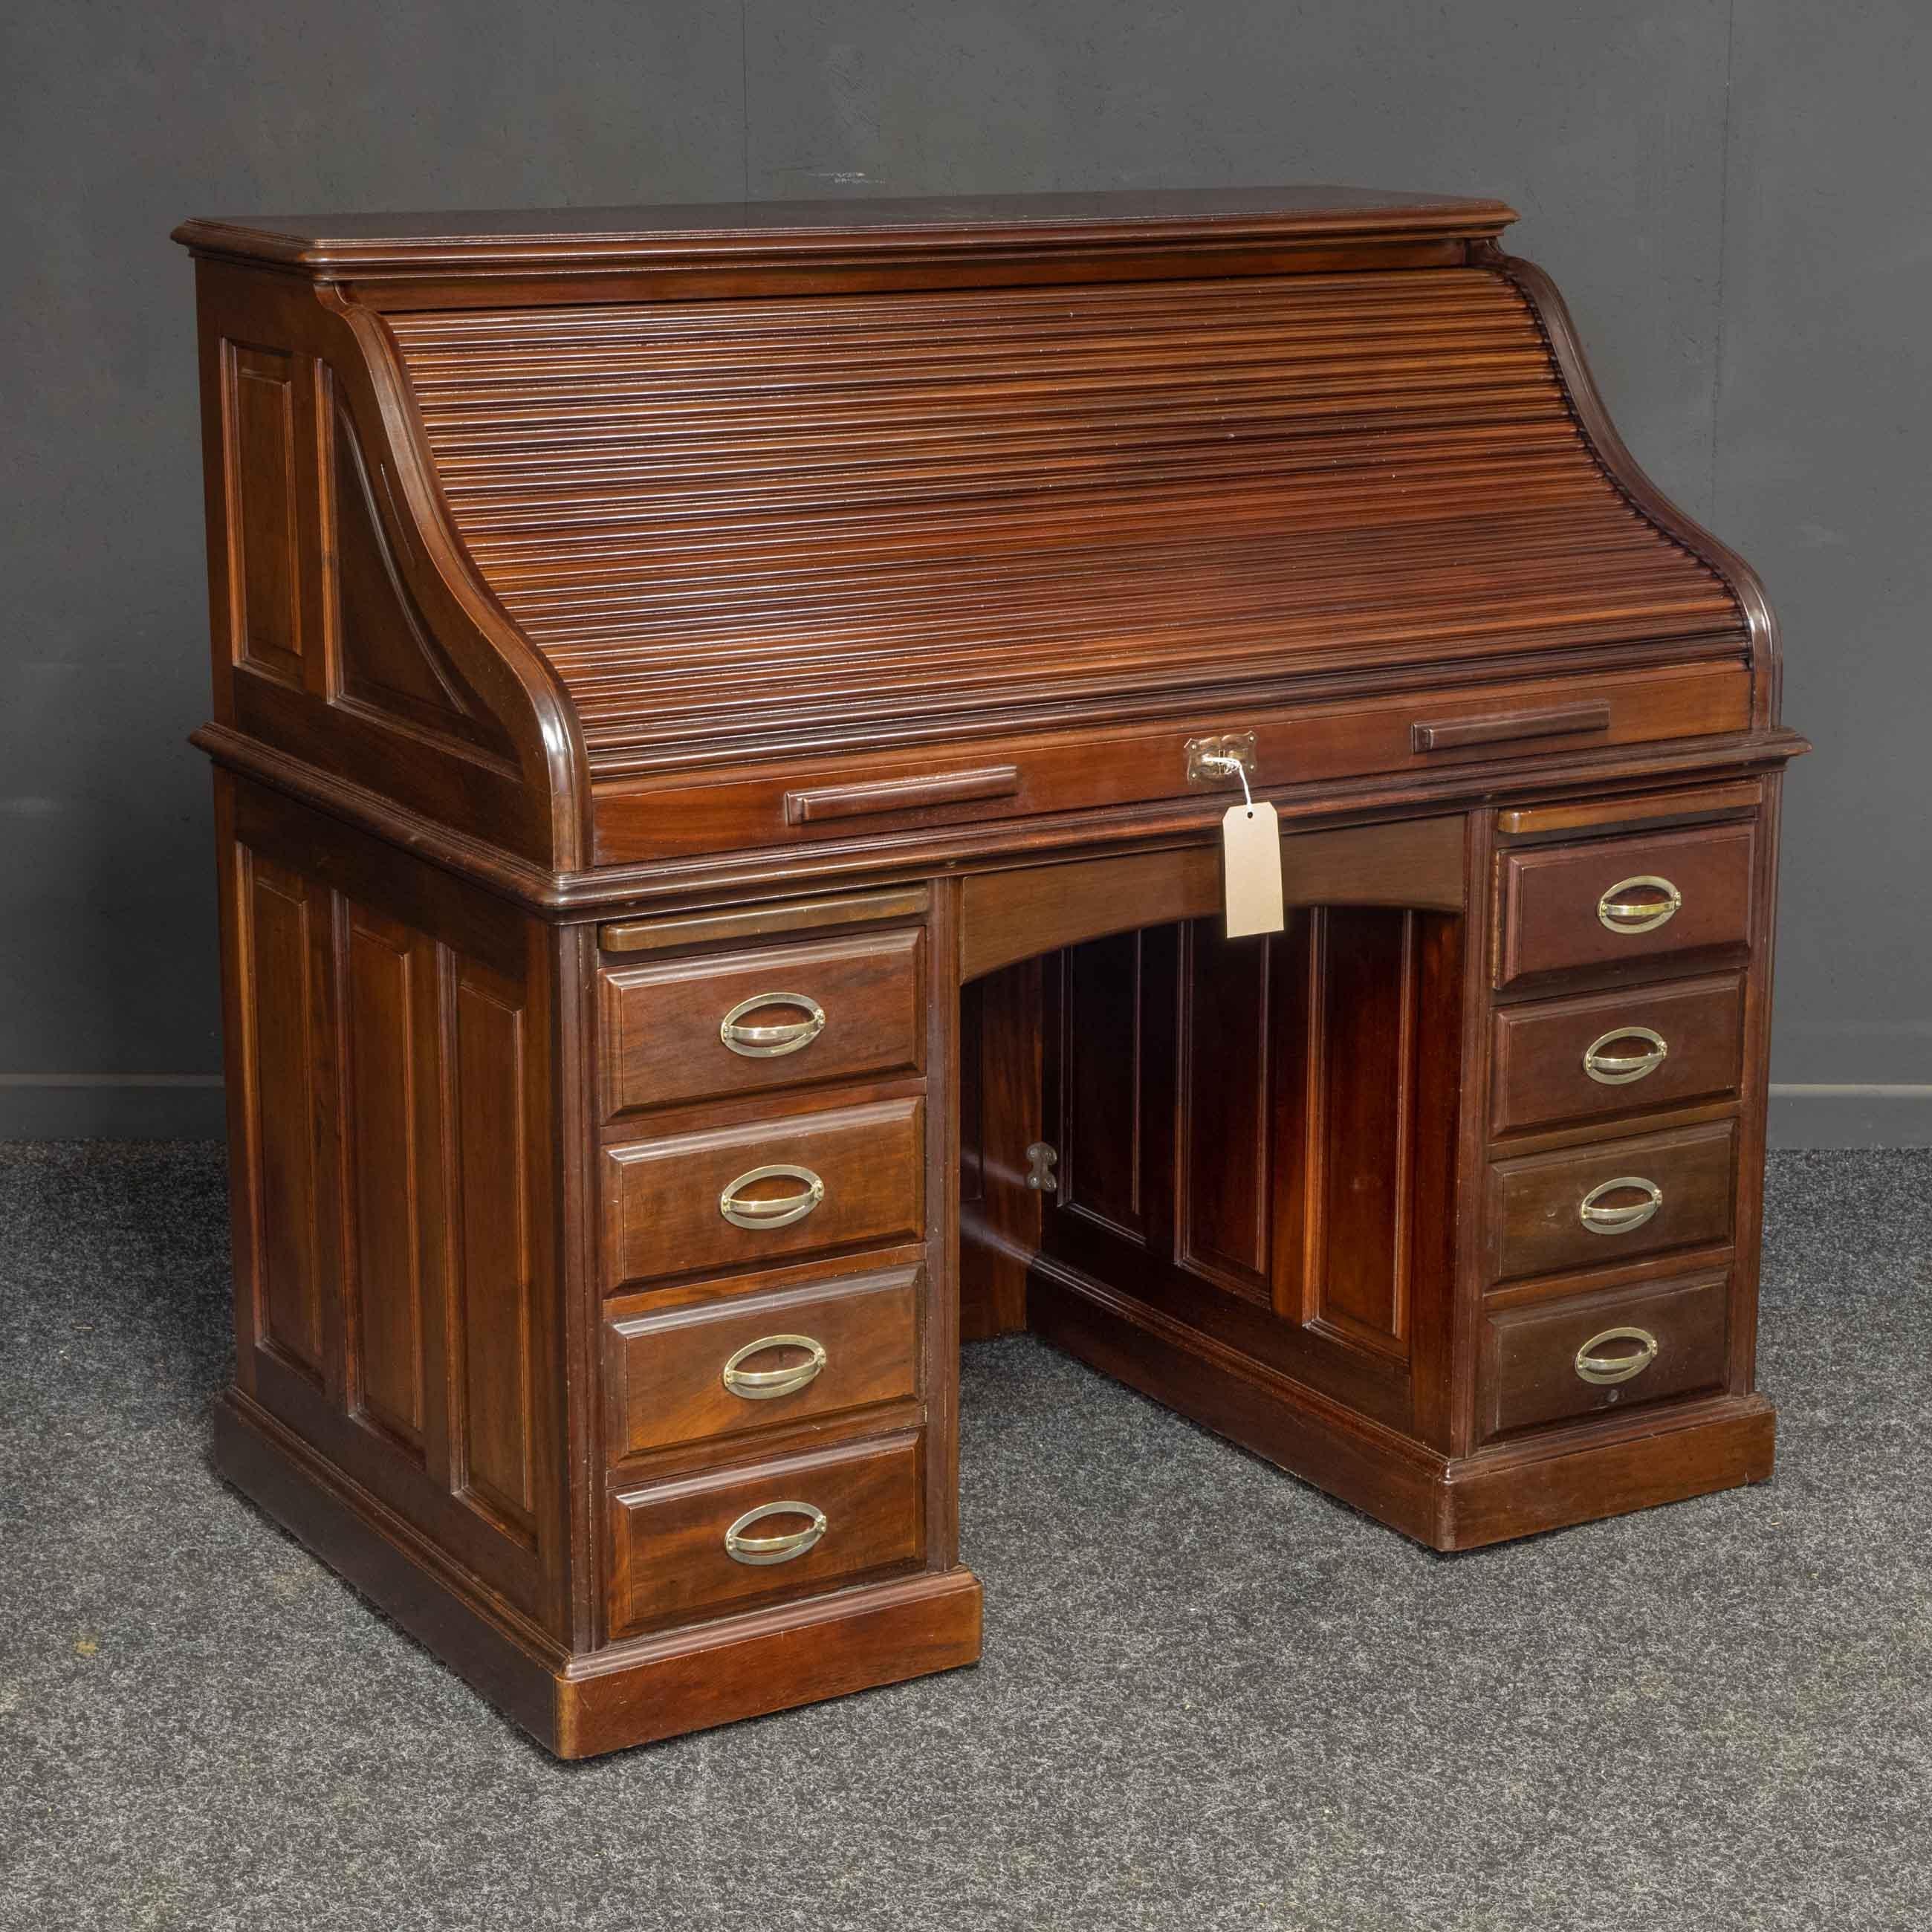 This is a fine quality antique mahogany roll top desk most likely made by Holland & Son or Maples. The satinwood veneered interior has many pigeon holes, and drawers plus two pen slides and two unusual finger pulls. The lock has been serviced and